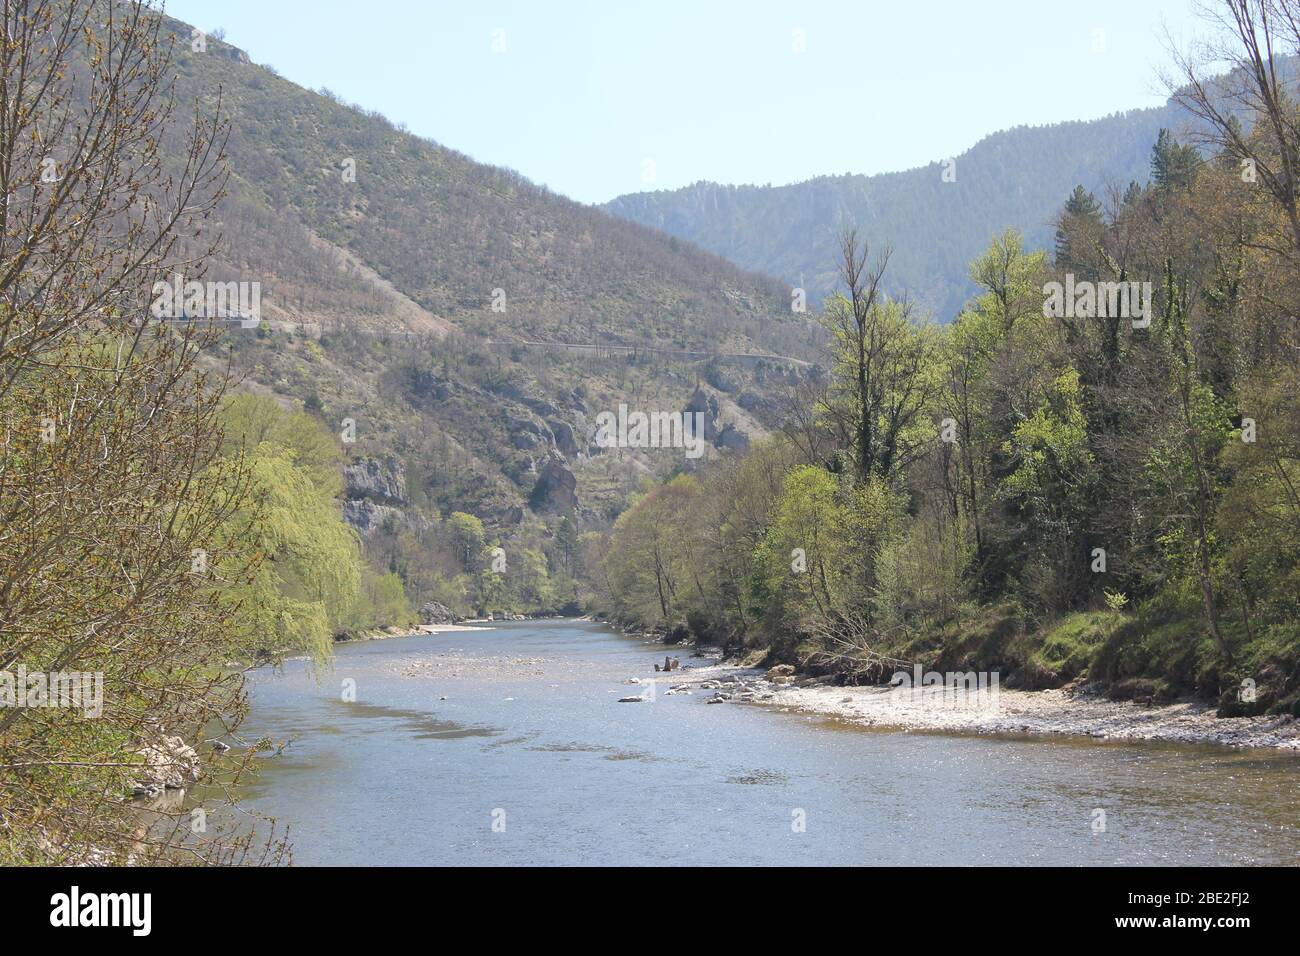 The Gorges du Tarn, limestone gorge with river, France Stock Photo